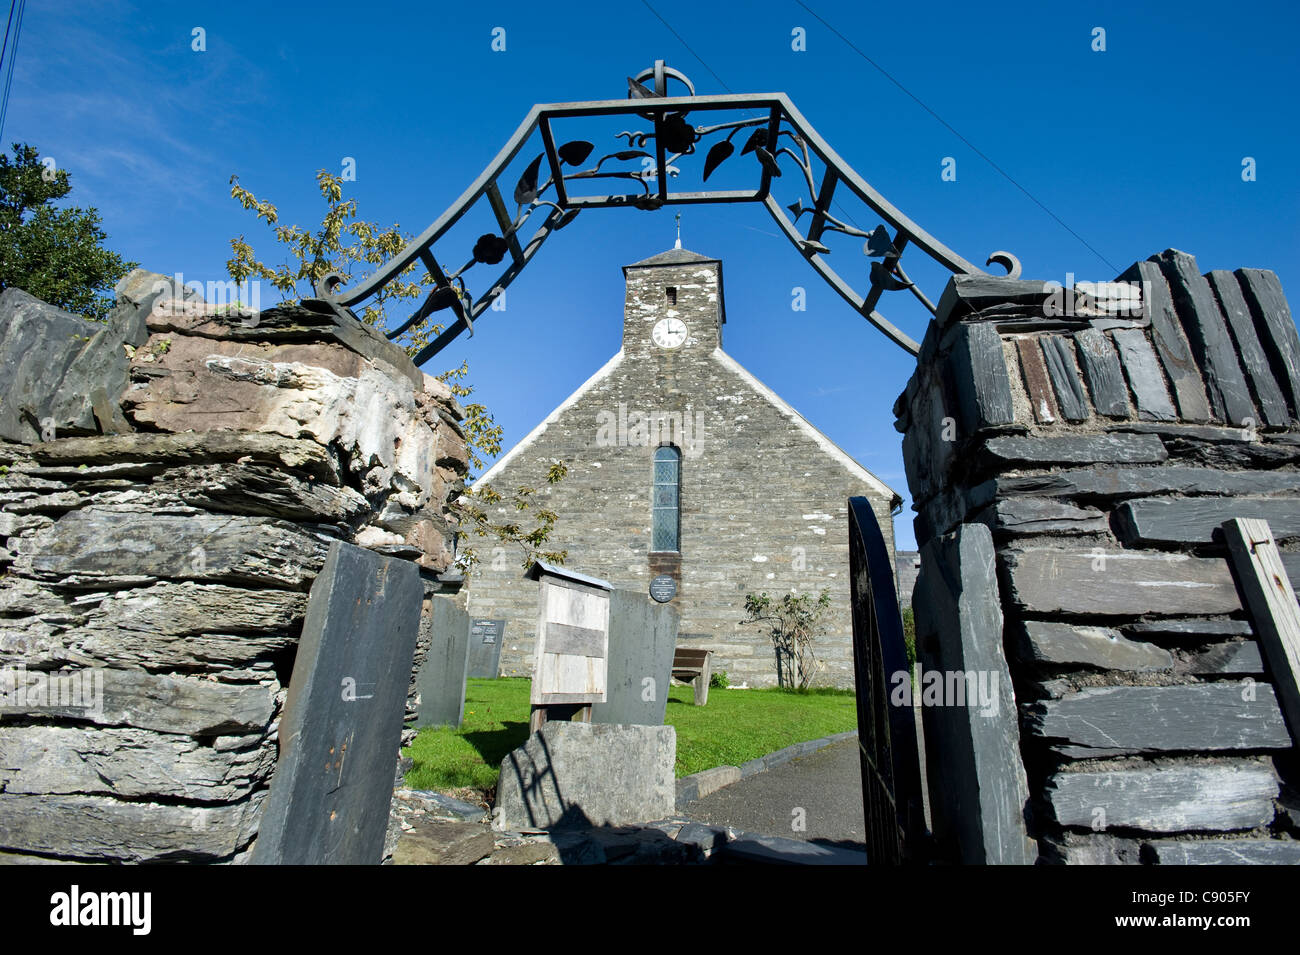 The wrought Iron entrance gate on a slate wall at St. Peter Ad Vincula Church in Pennal, Powys, North Wales.  The church dating from 1406 was Chapel Royal to Prince Owain Glyndwr. ( Owen Glendower ) Stock Photo